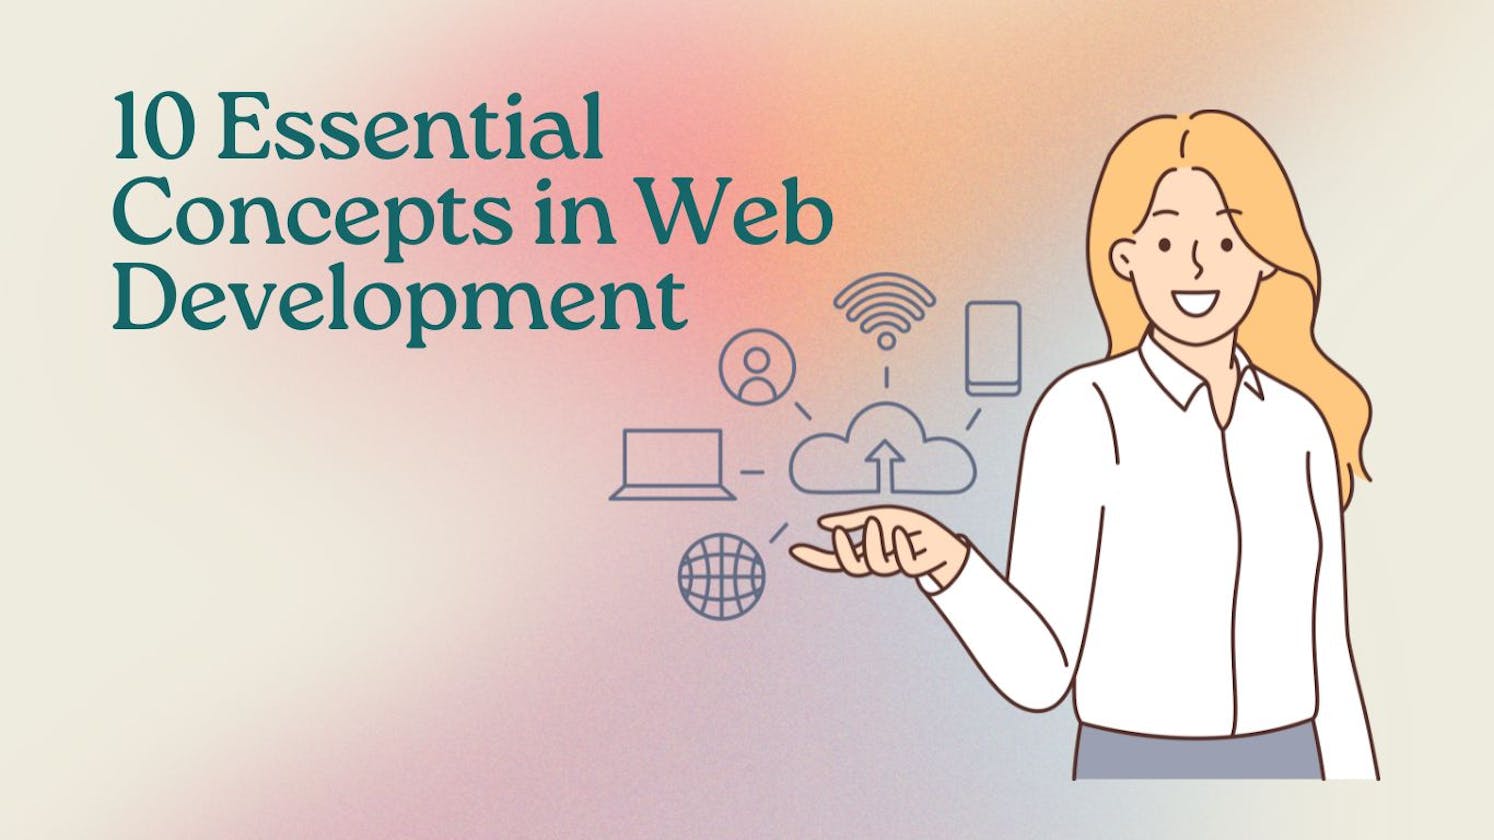 10 Essential Concepts Every Beginner Should Master in Web Development